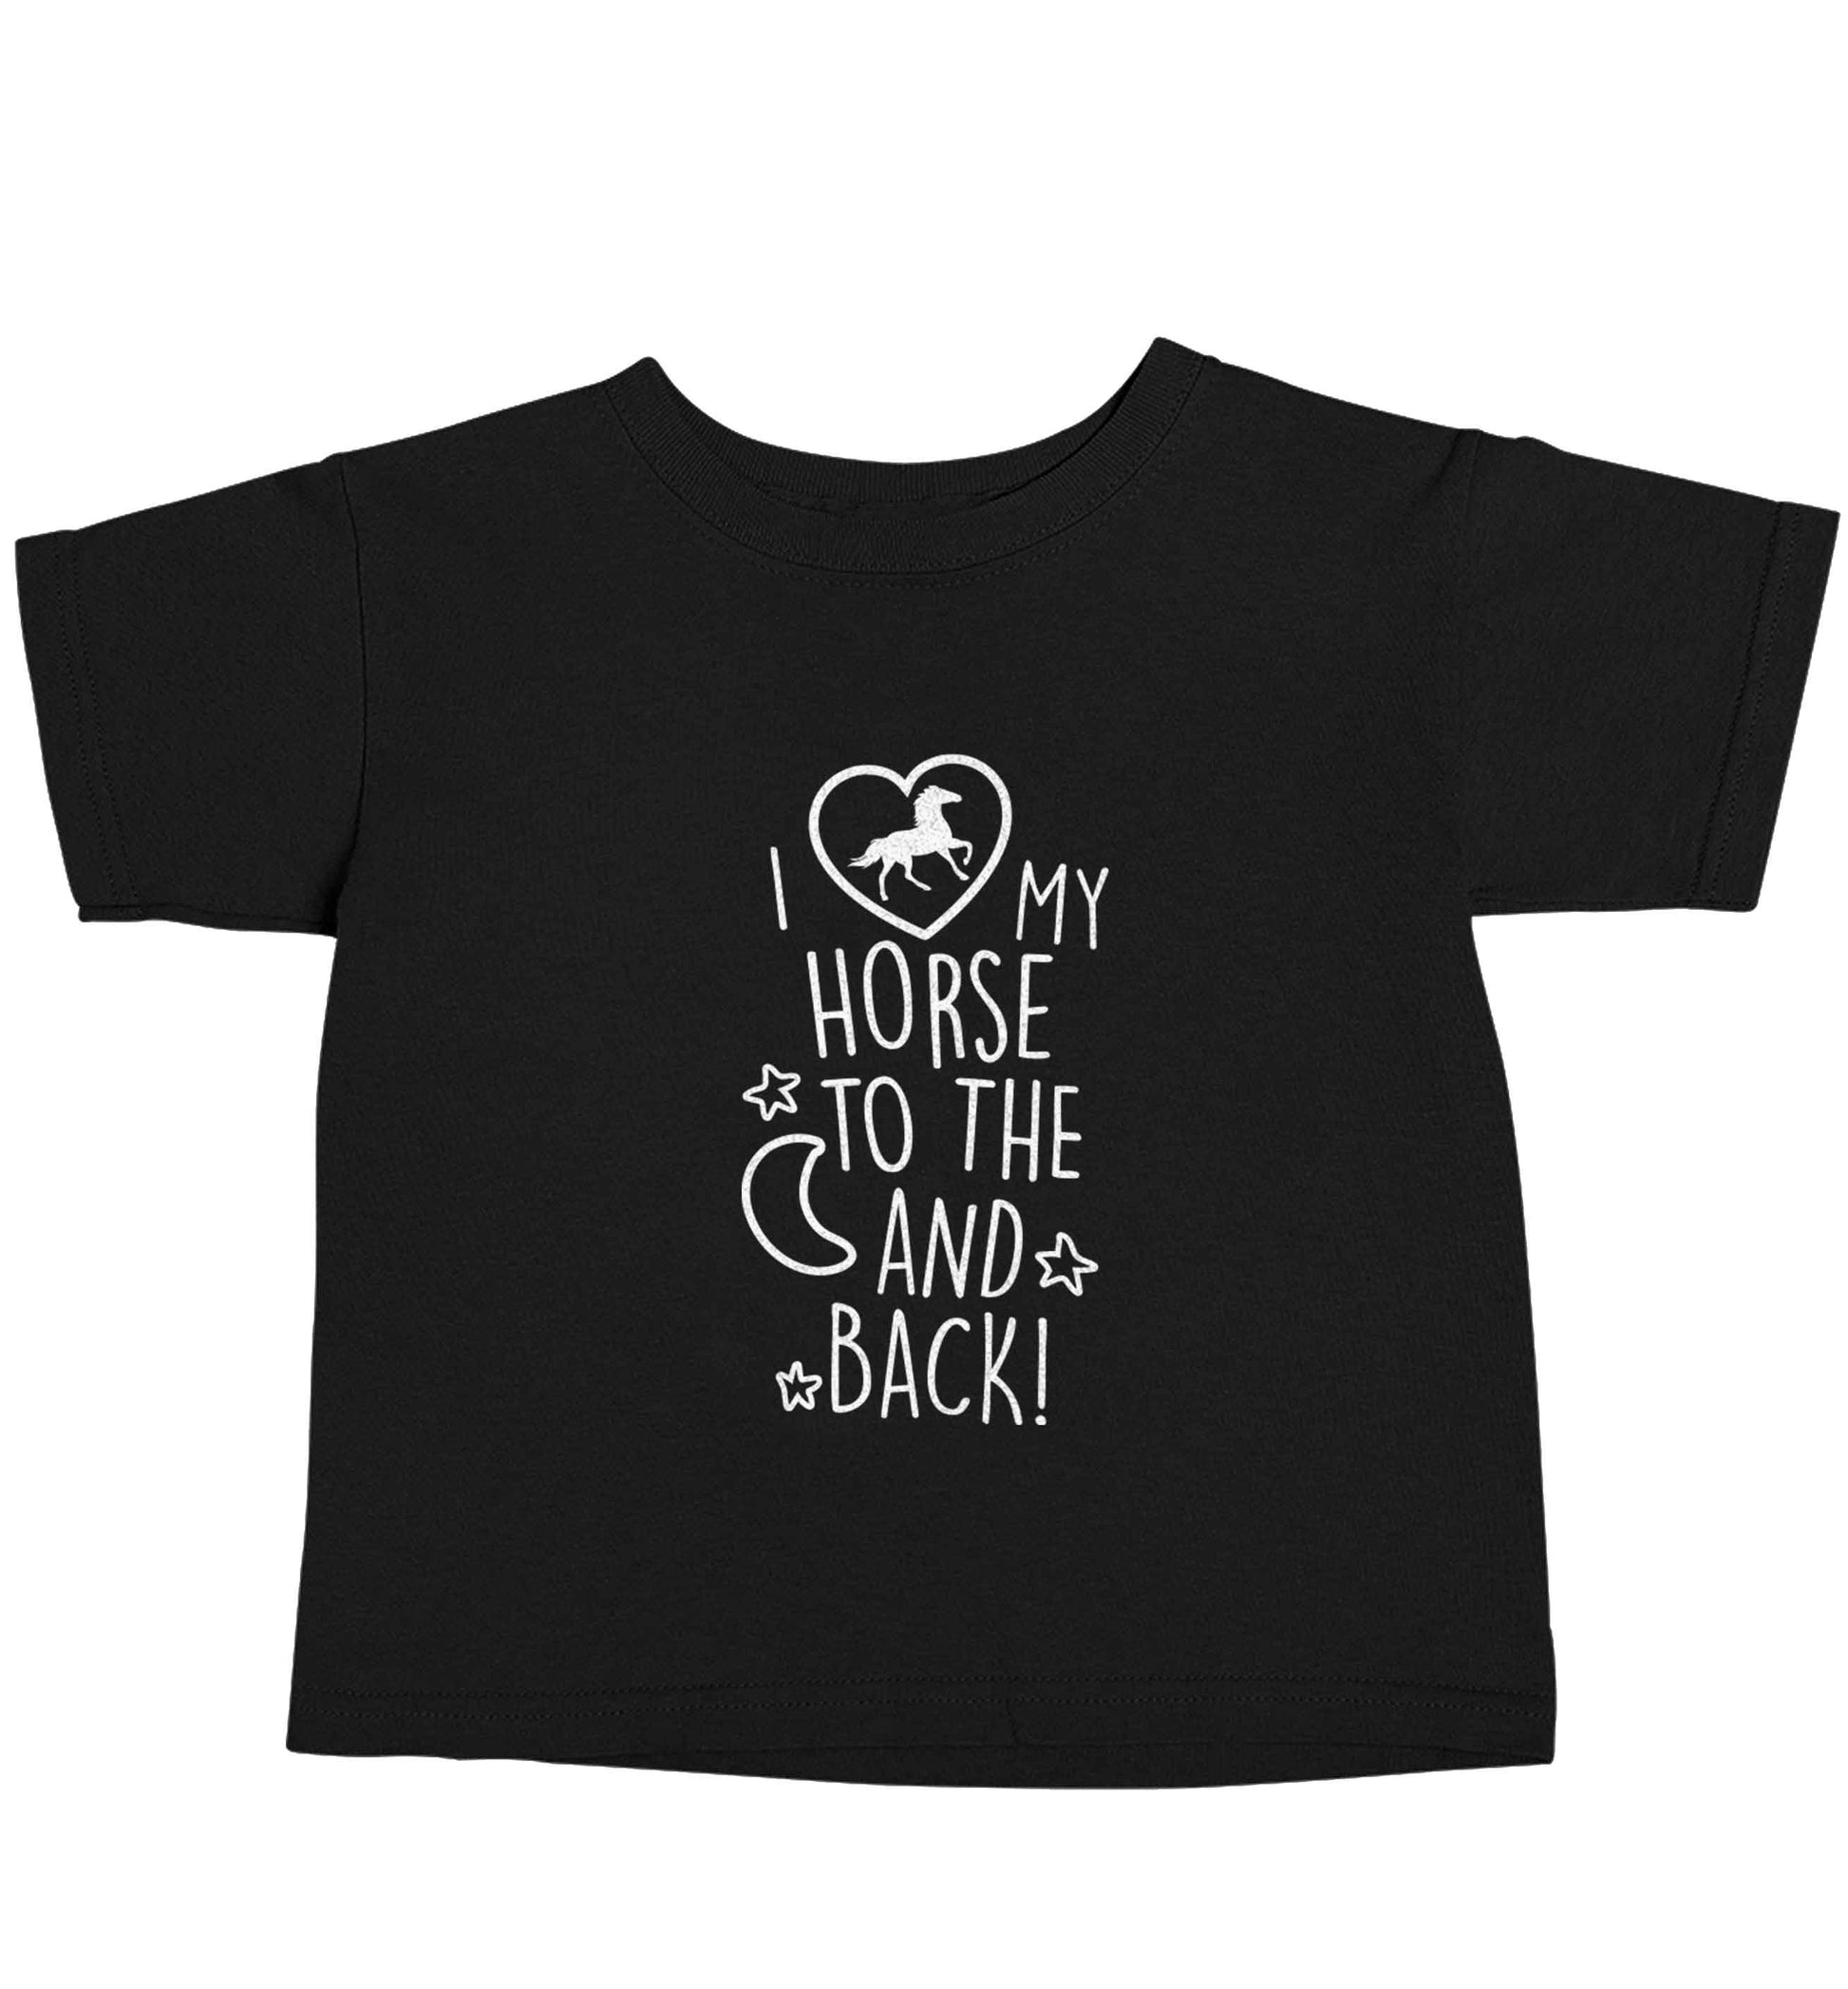 I love my horse to the moon and back Black baby toddler Tshirt 2 years